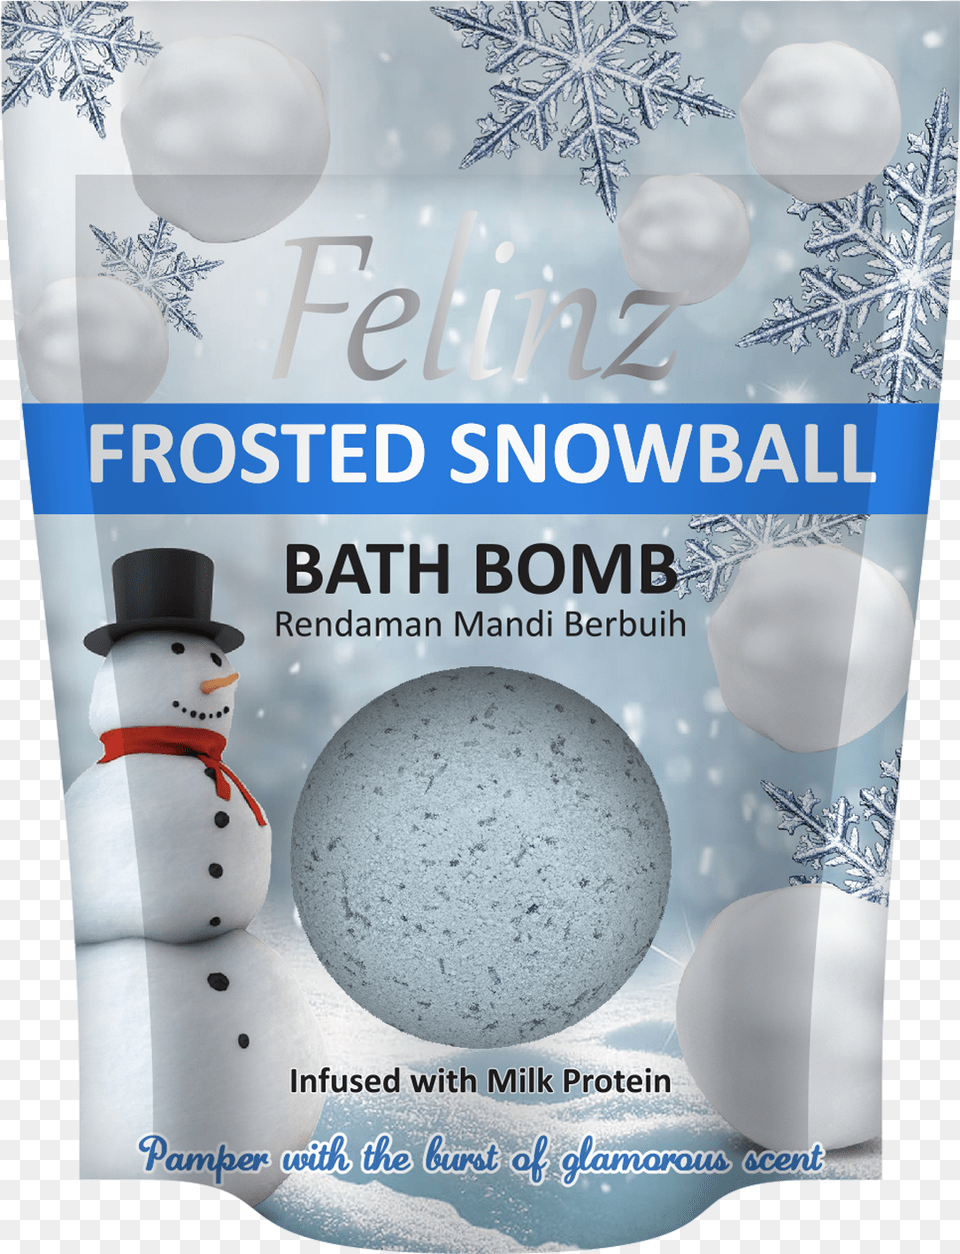 Felinz Frosted Snowball Bath Bomb Flyer, Advertisement, Nature, Outdoors, Poster Png Image